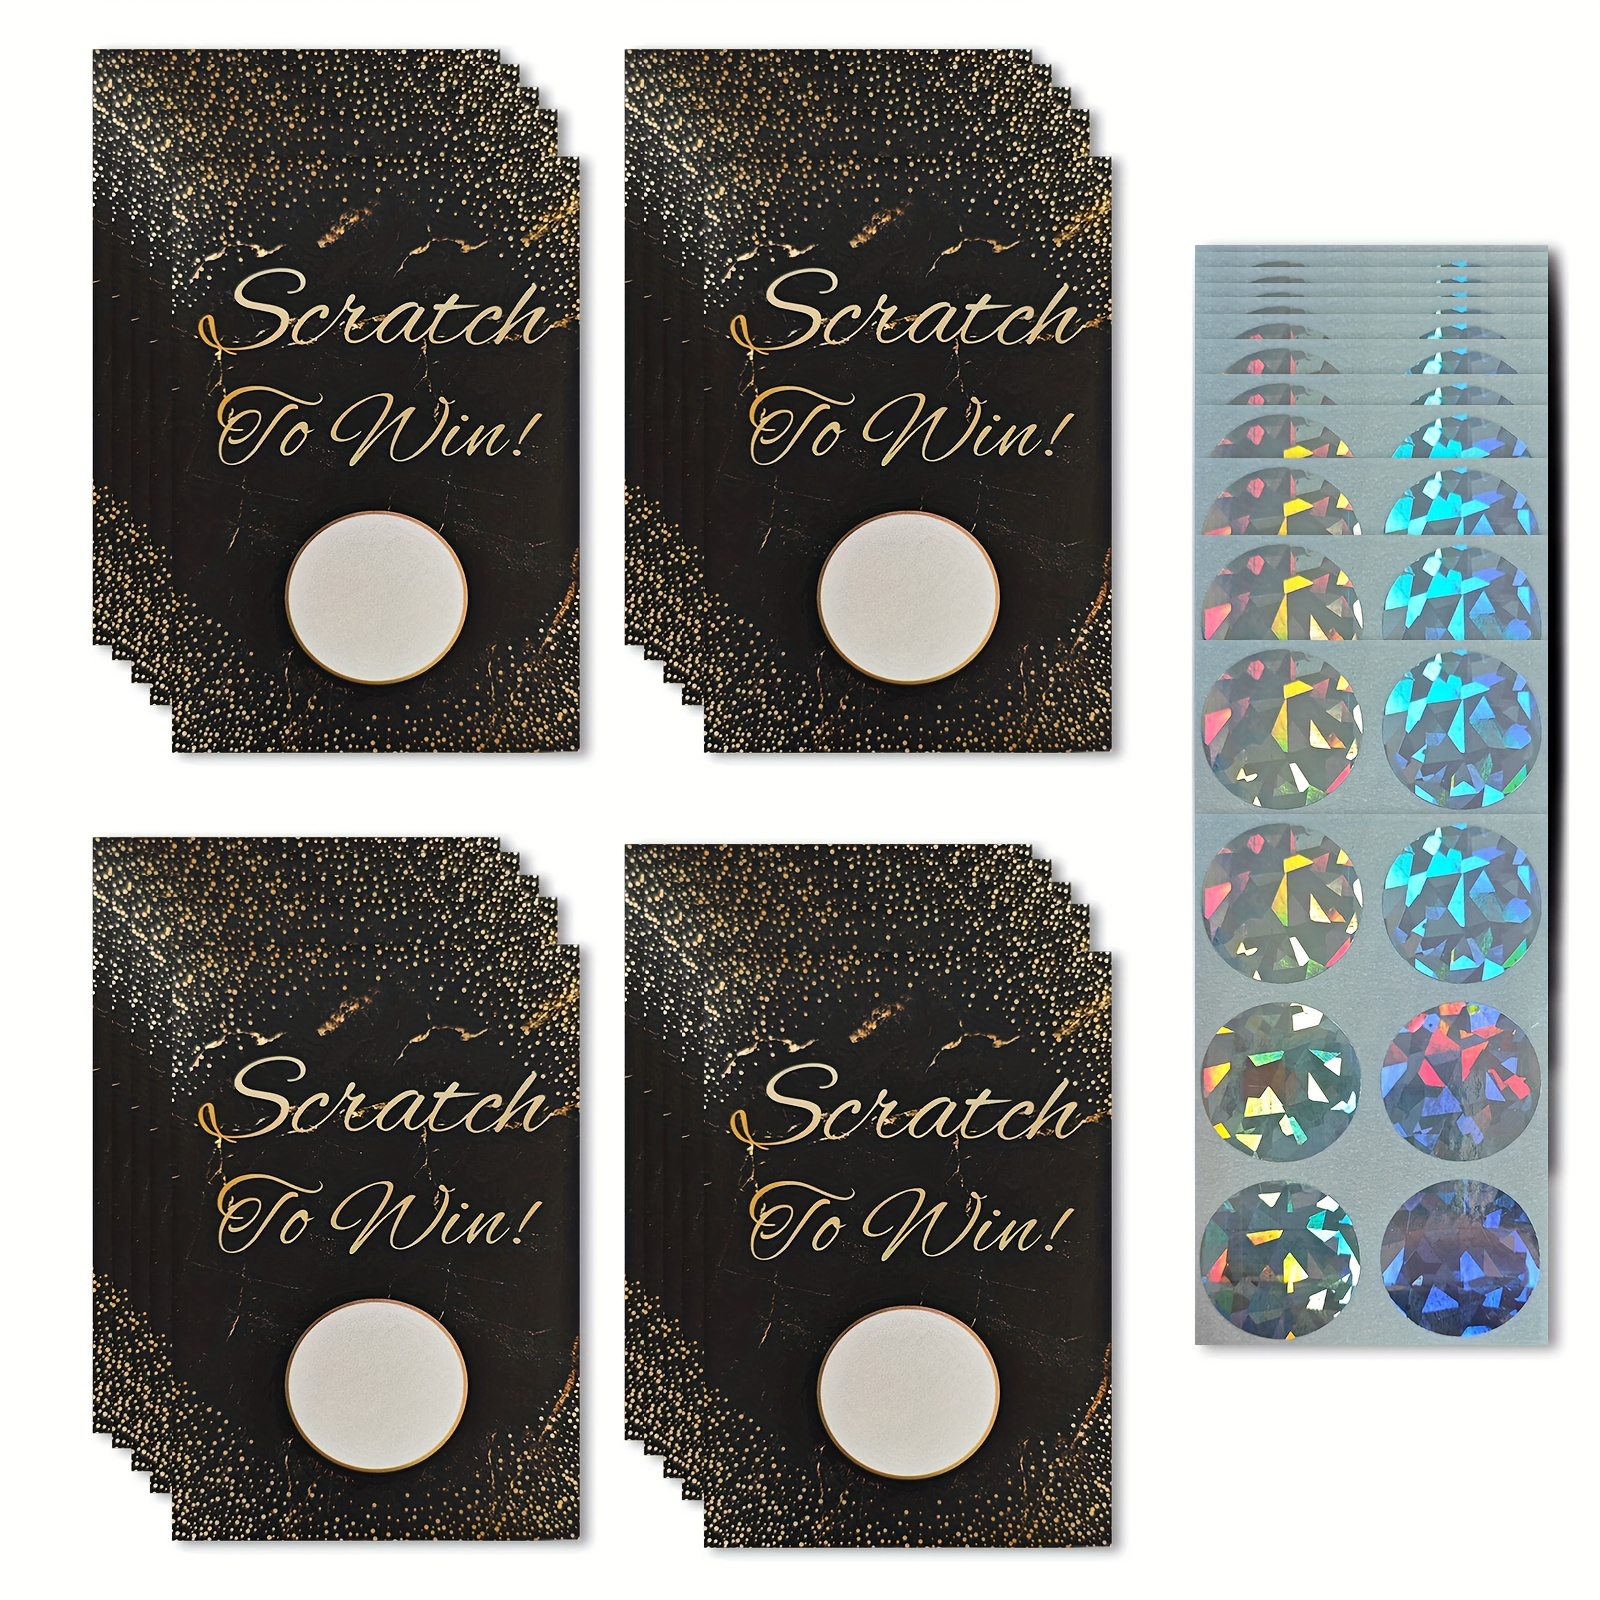 160 ROUND SCRATCH OFF STICKERS 1 LABELS PARTY FAVORS GAMES - FREE SHIPPING